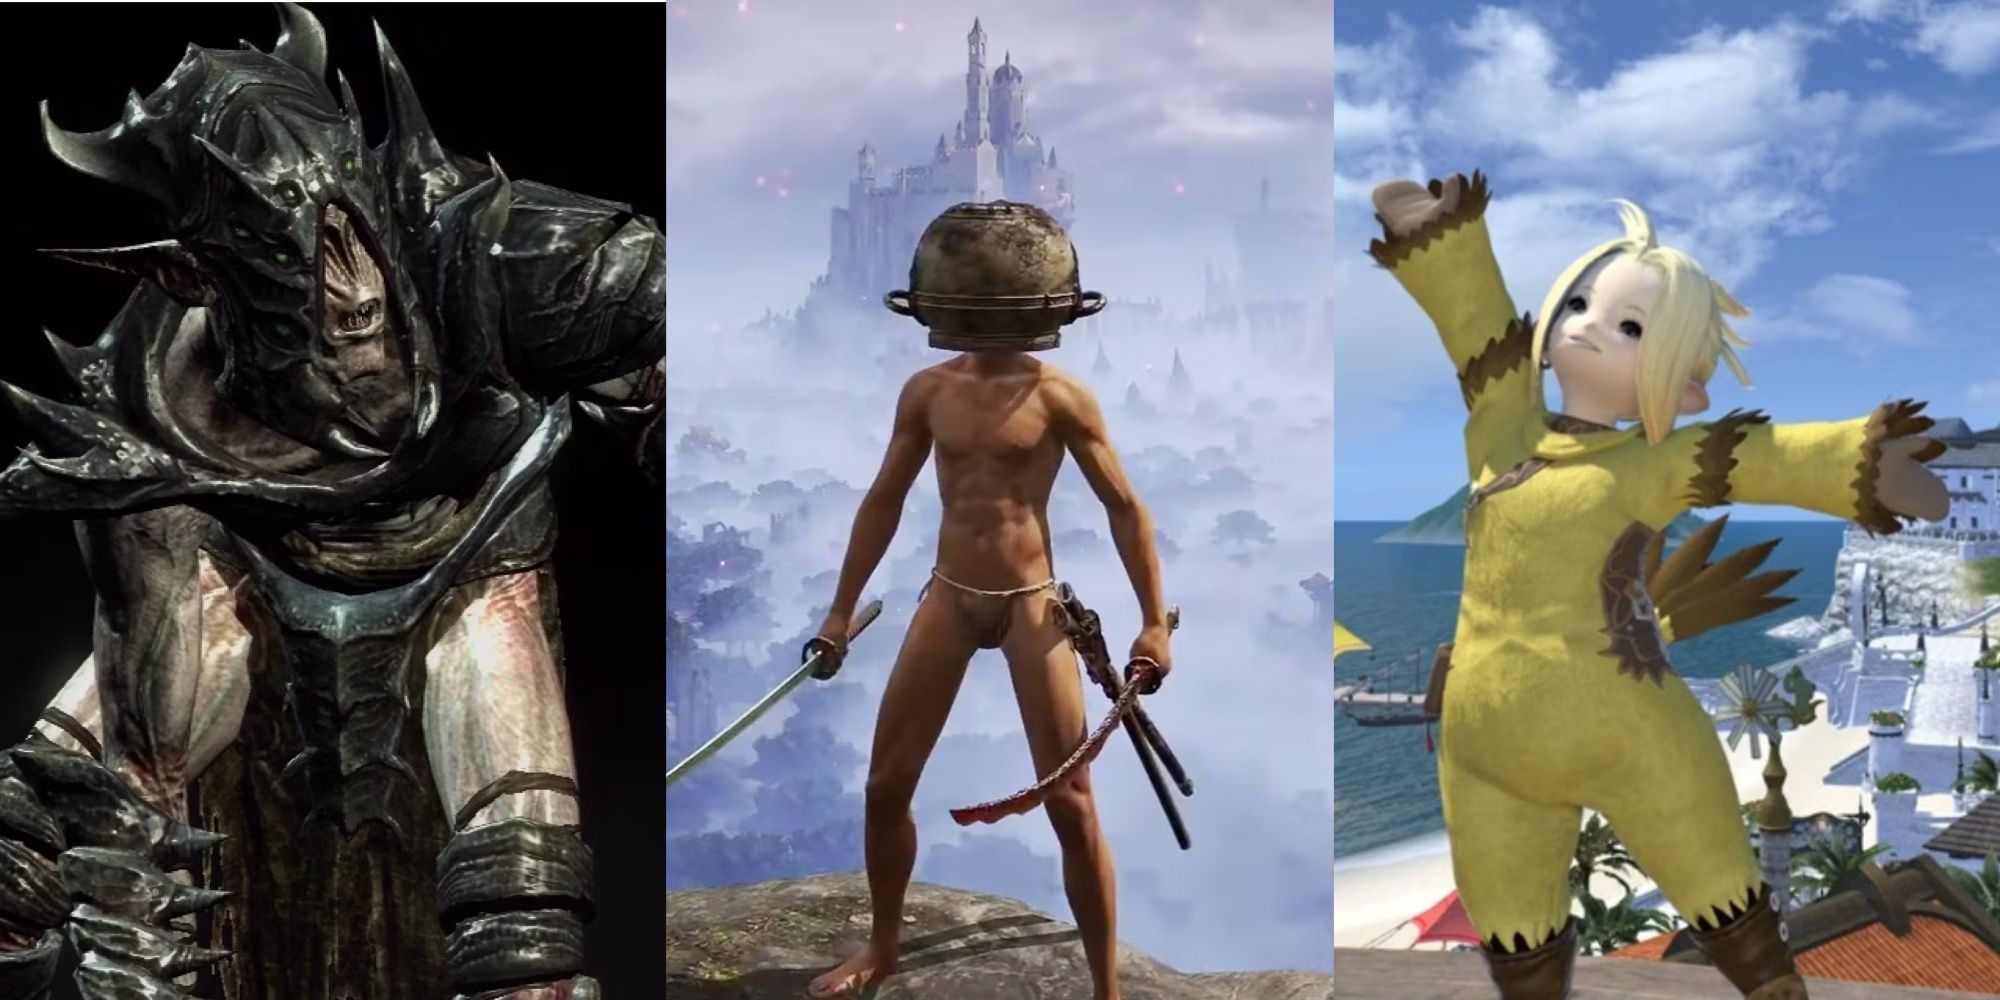 Split images of the Falmer armor in Skyrim, the jar helm in Elden Ring, and the chocobo armor in Final Fantasy